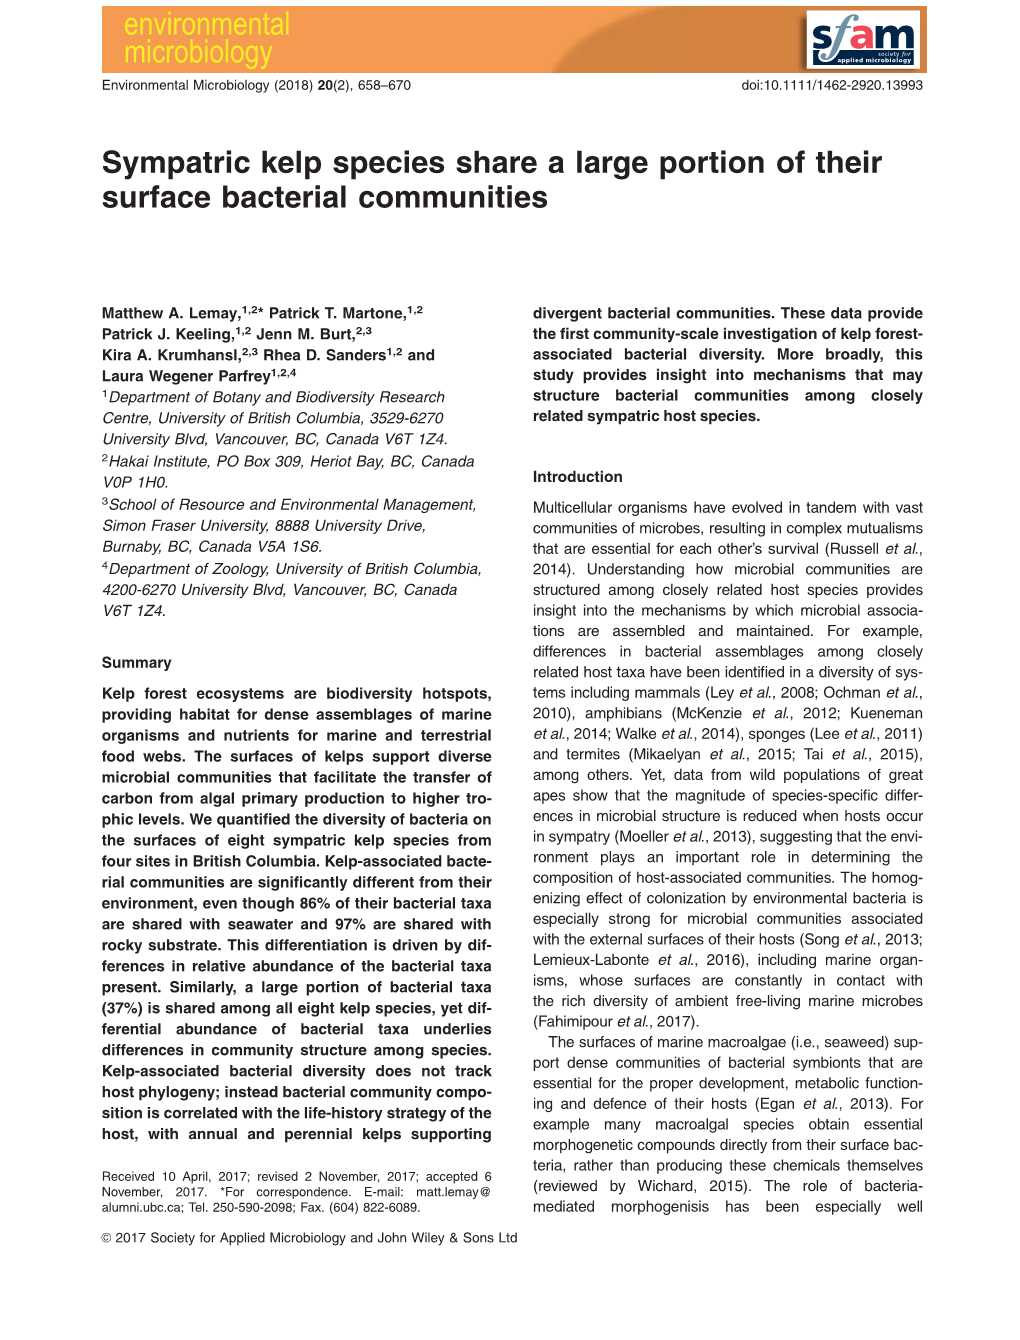 Sympatric Kelp Species Share a Large Portion of Their Surface Bacterial Communities